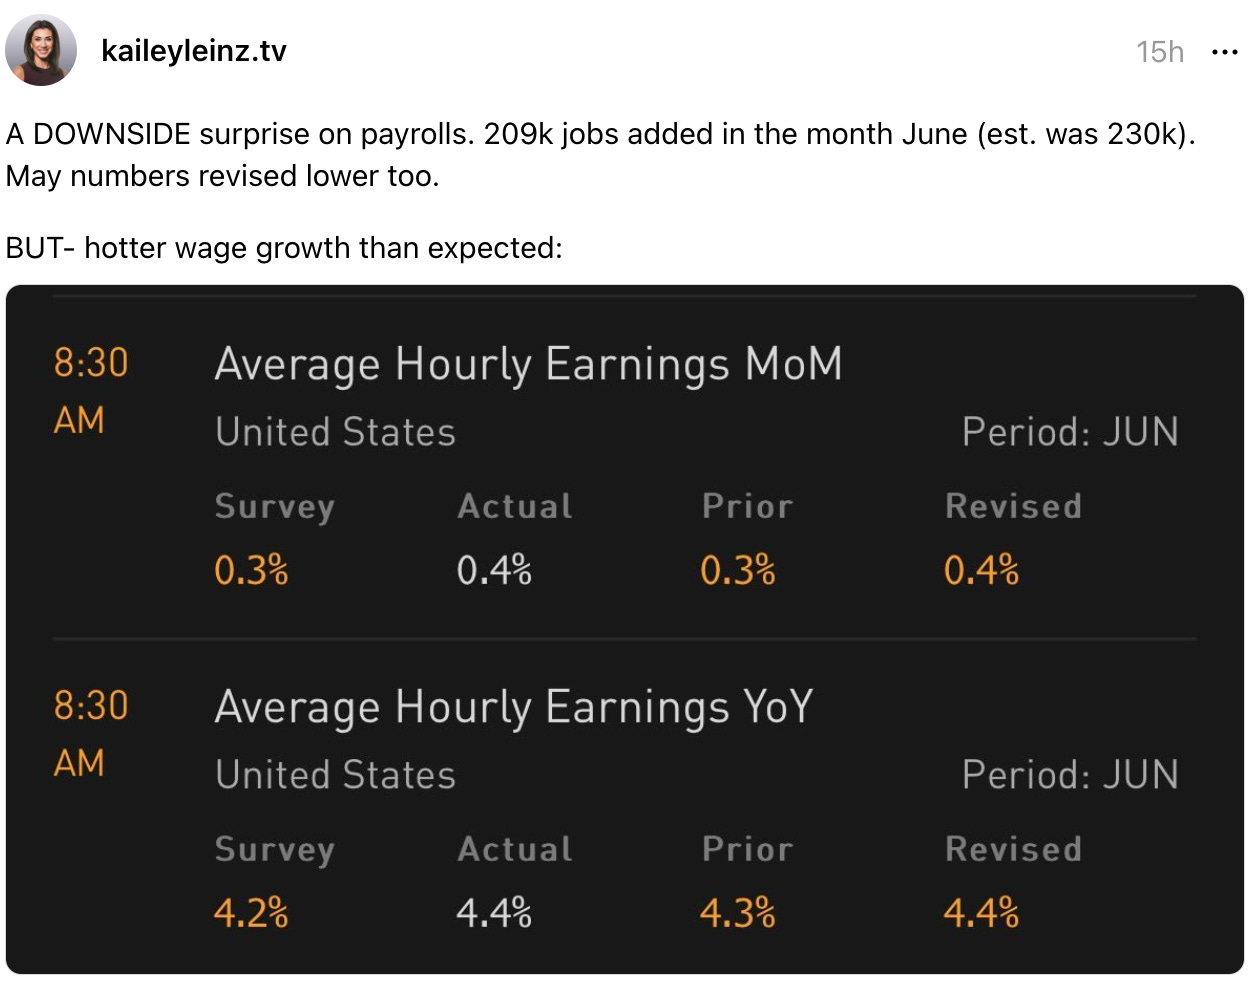 kaileyleinz.tv 15h A DOWNSIDE surprise on payrolls. 209k jobs added in the month June (est. was 230k). May numbers revised lower too.  BUT- hotter wage growth than expected: